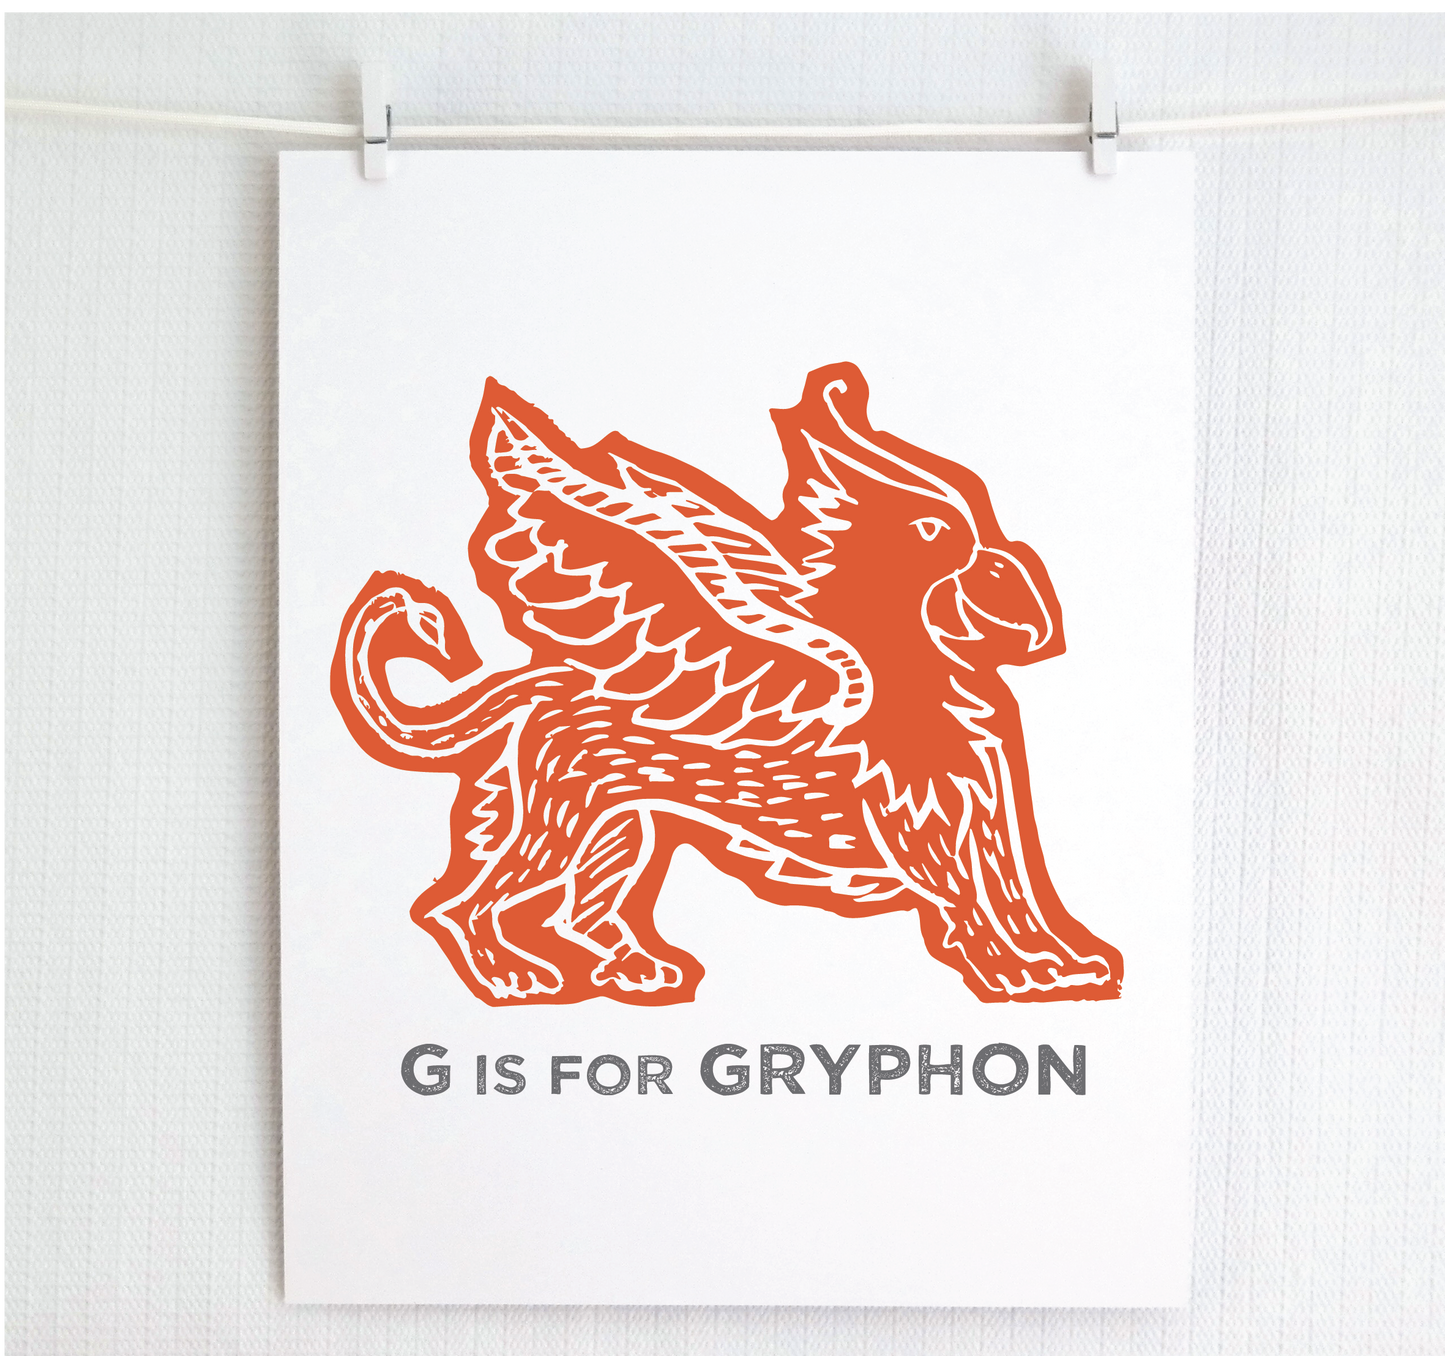 G is for Gryphon